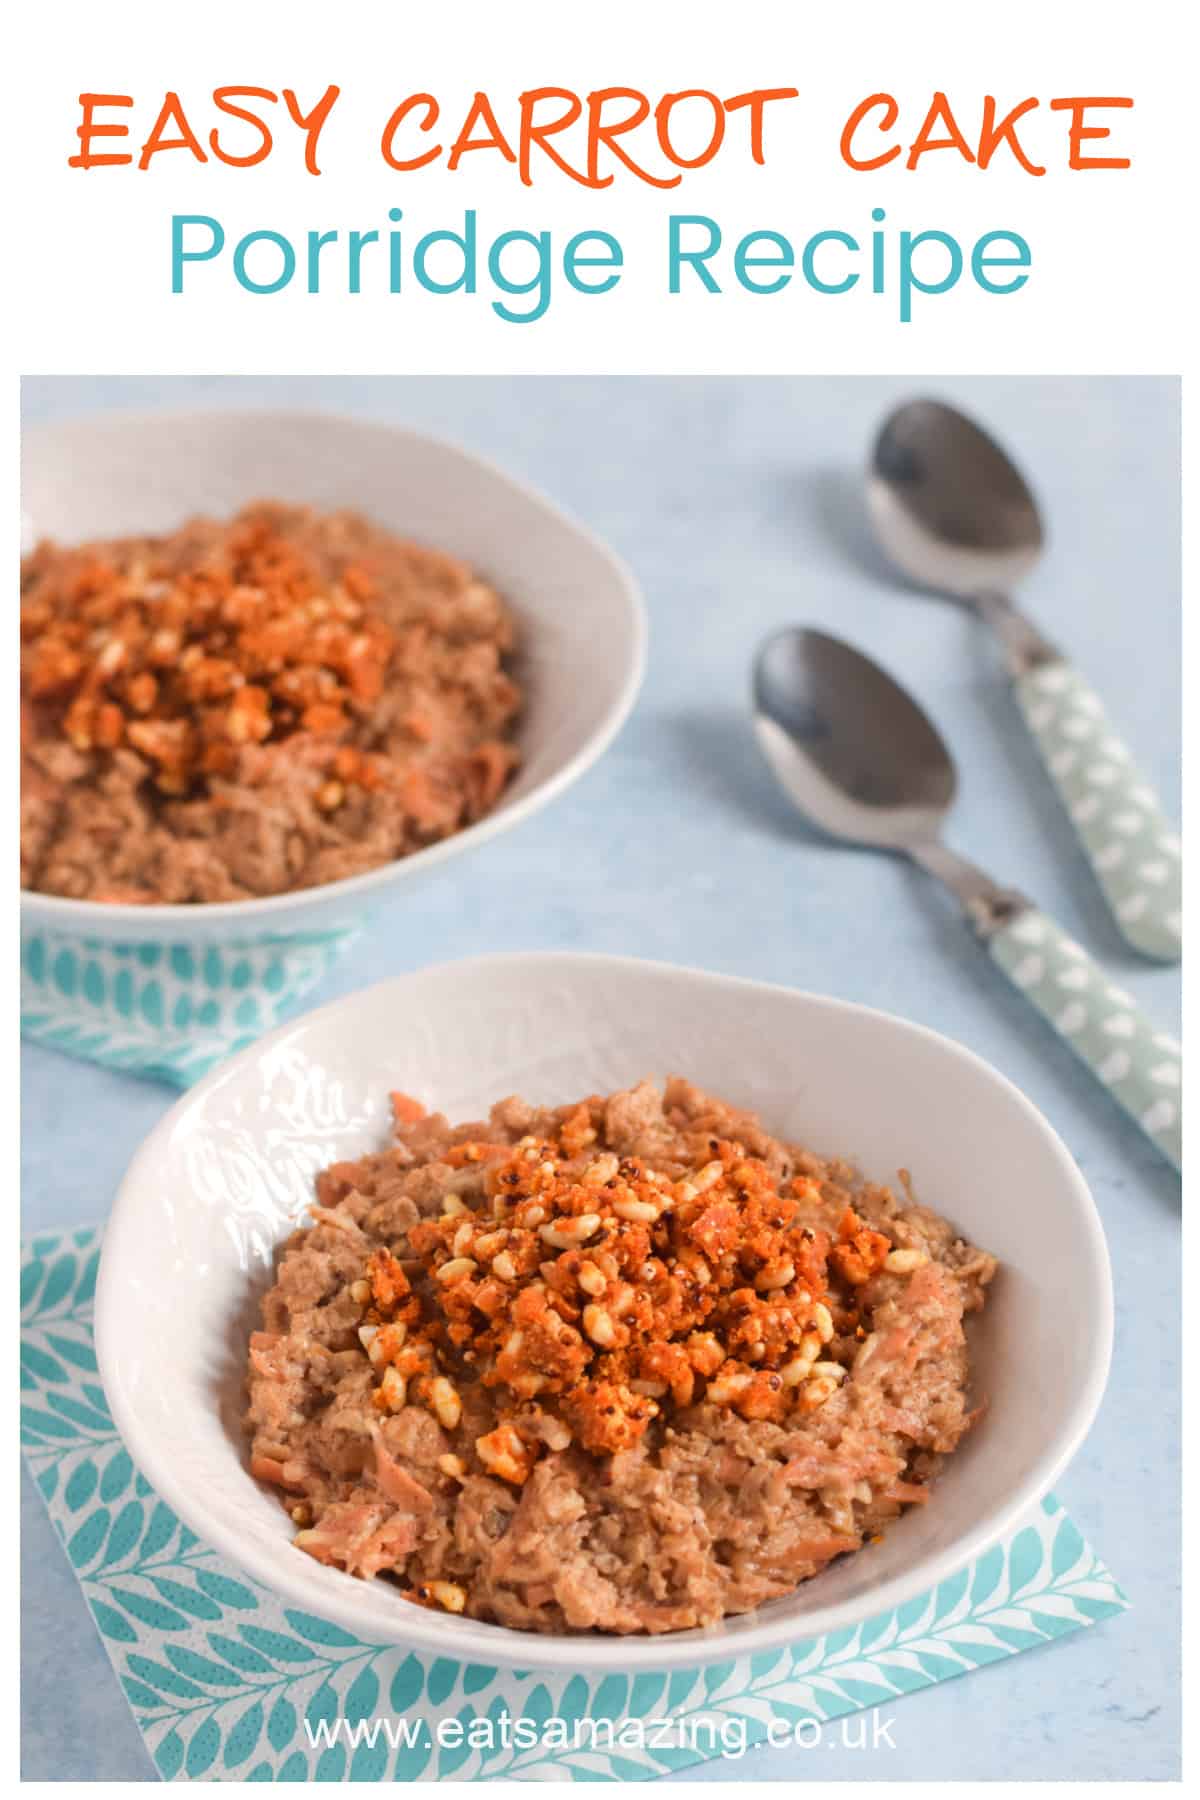 Easy Carrot Cake Porridge Recipe - quick and healthy breakfast idea with grated carrot and apple